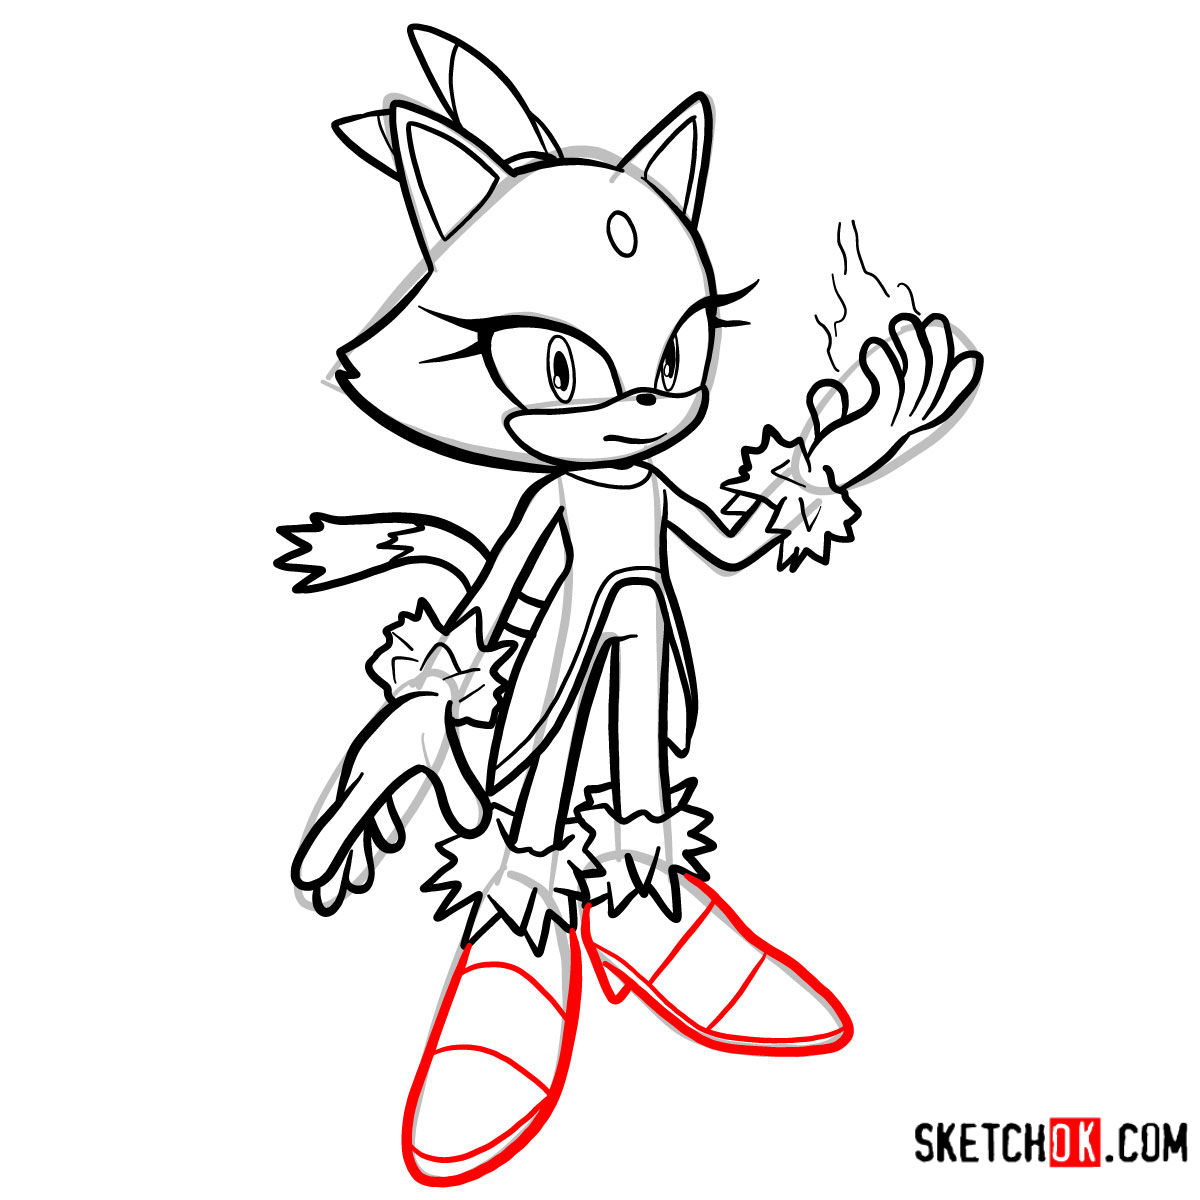 How to draw Blaze the Cat | Sonic the Hedgehog - step 11